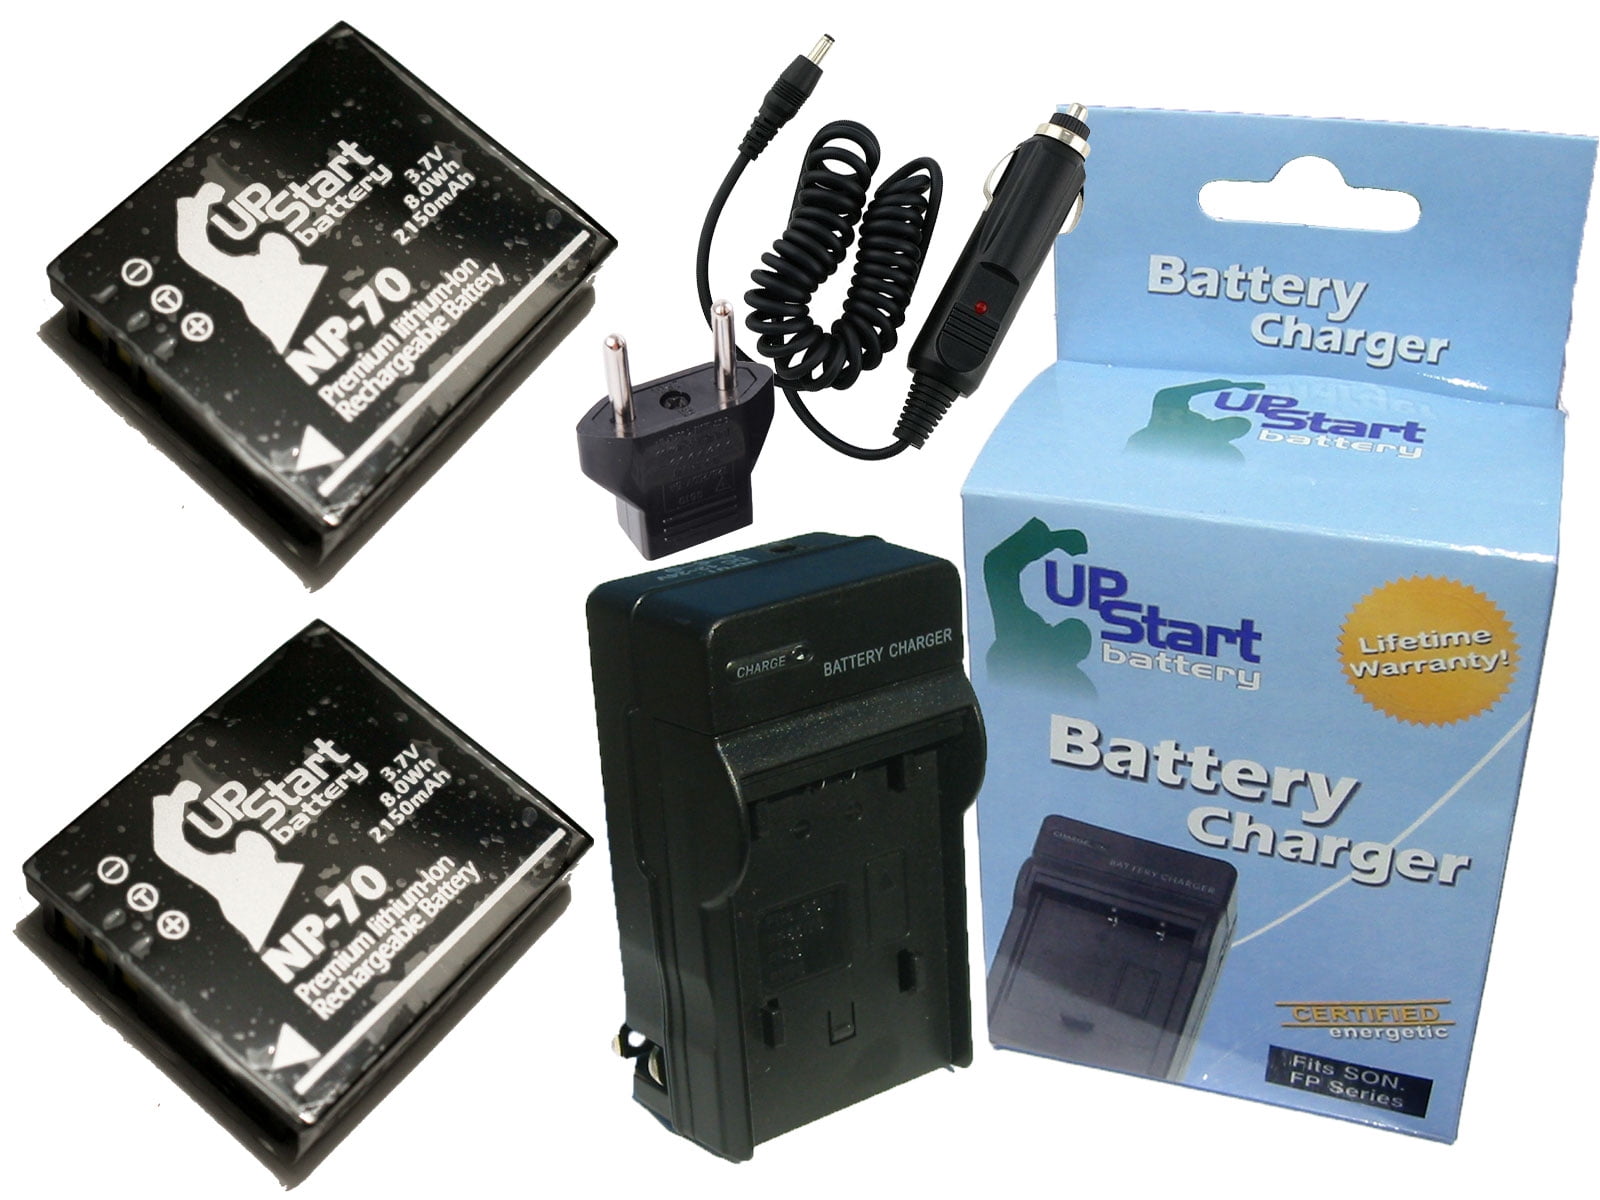 2x Pack - Ricoh G700SE Battery + Charger with Car & EU Adapters